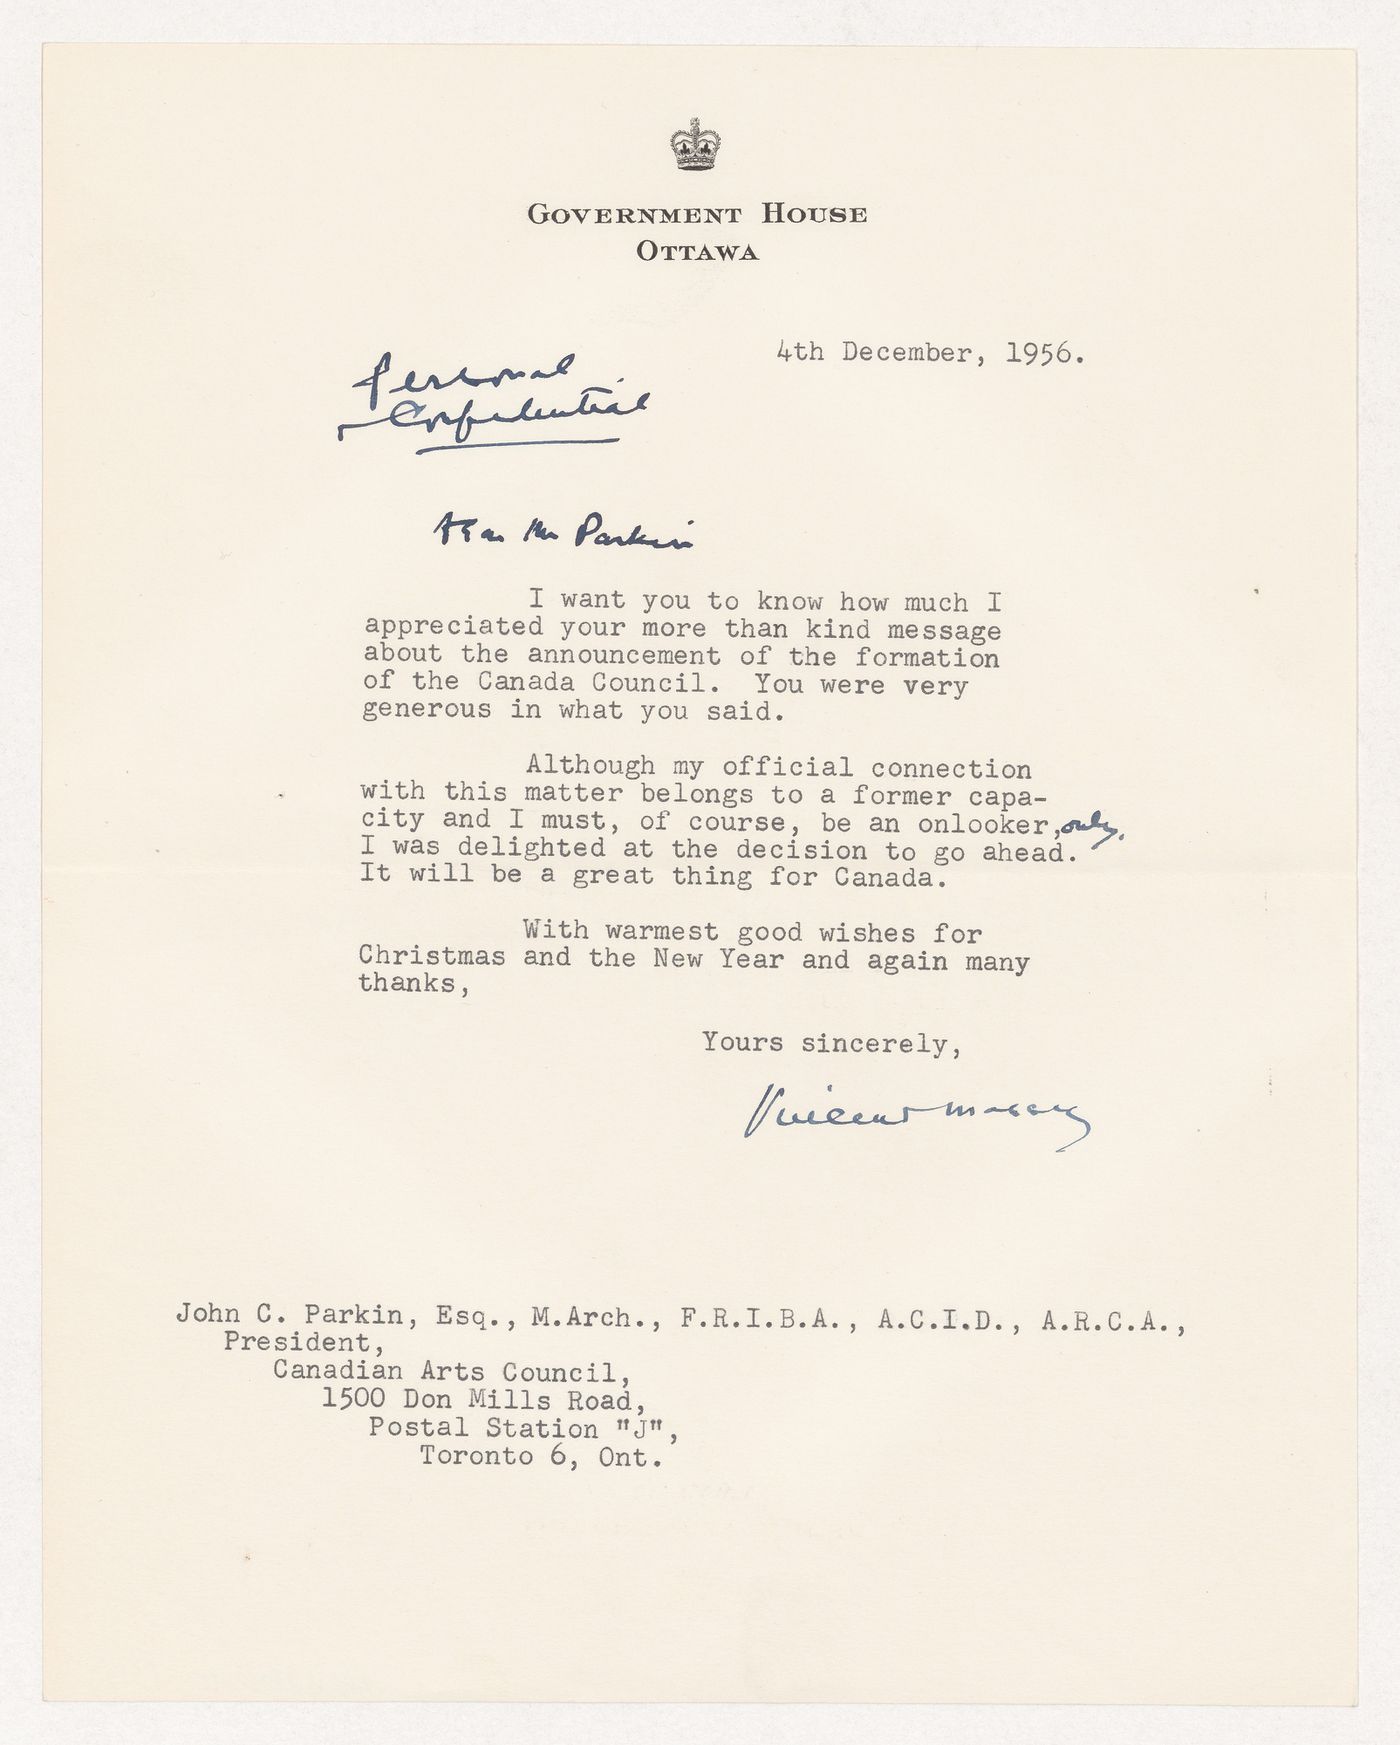 Letter from Governor General Vincent Massey to Parkin on formation of Canada Council